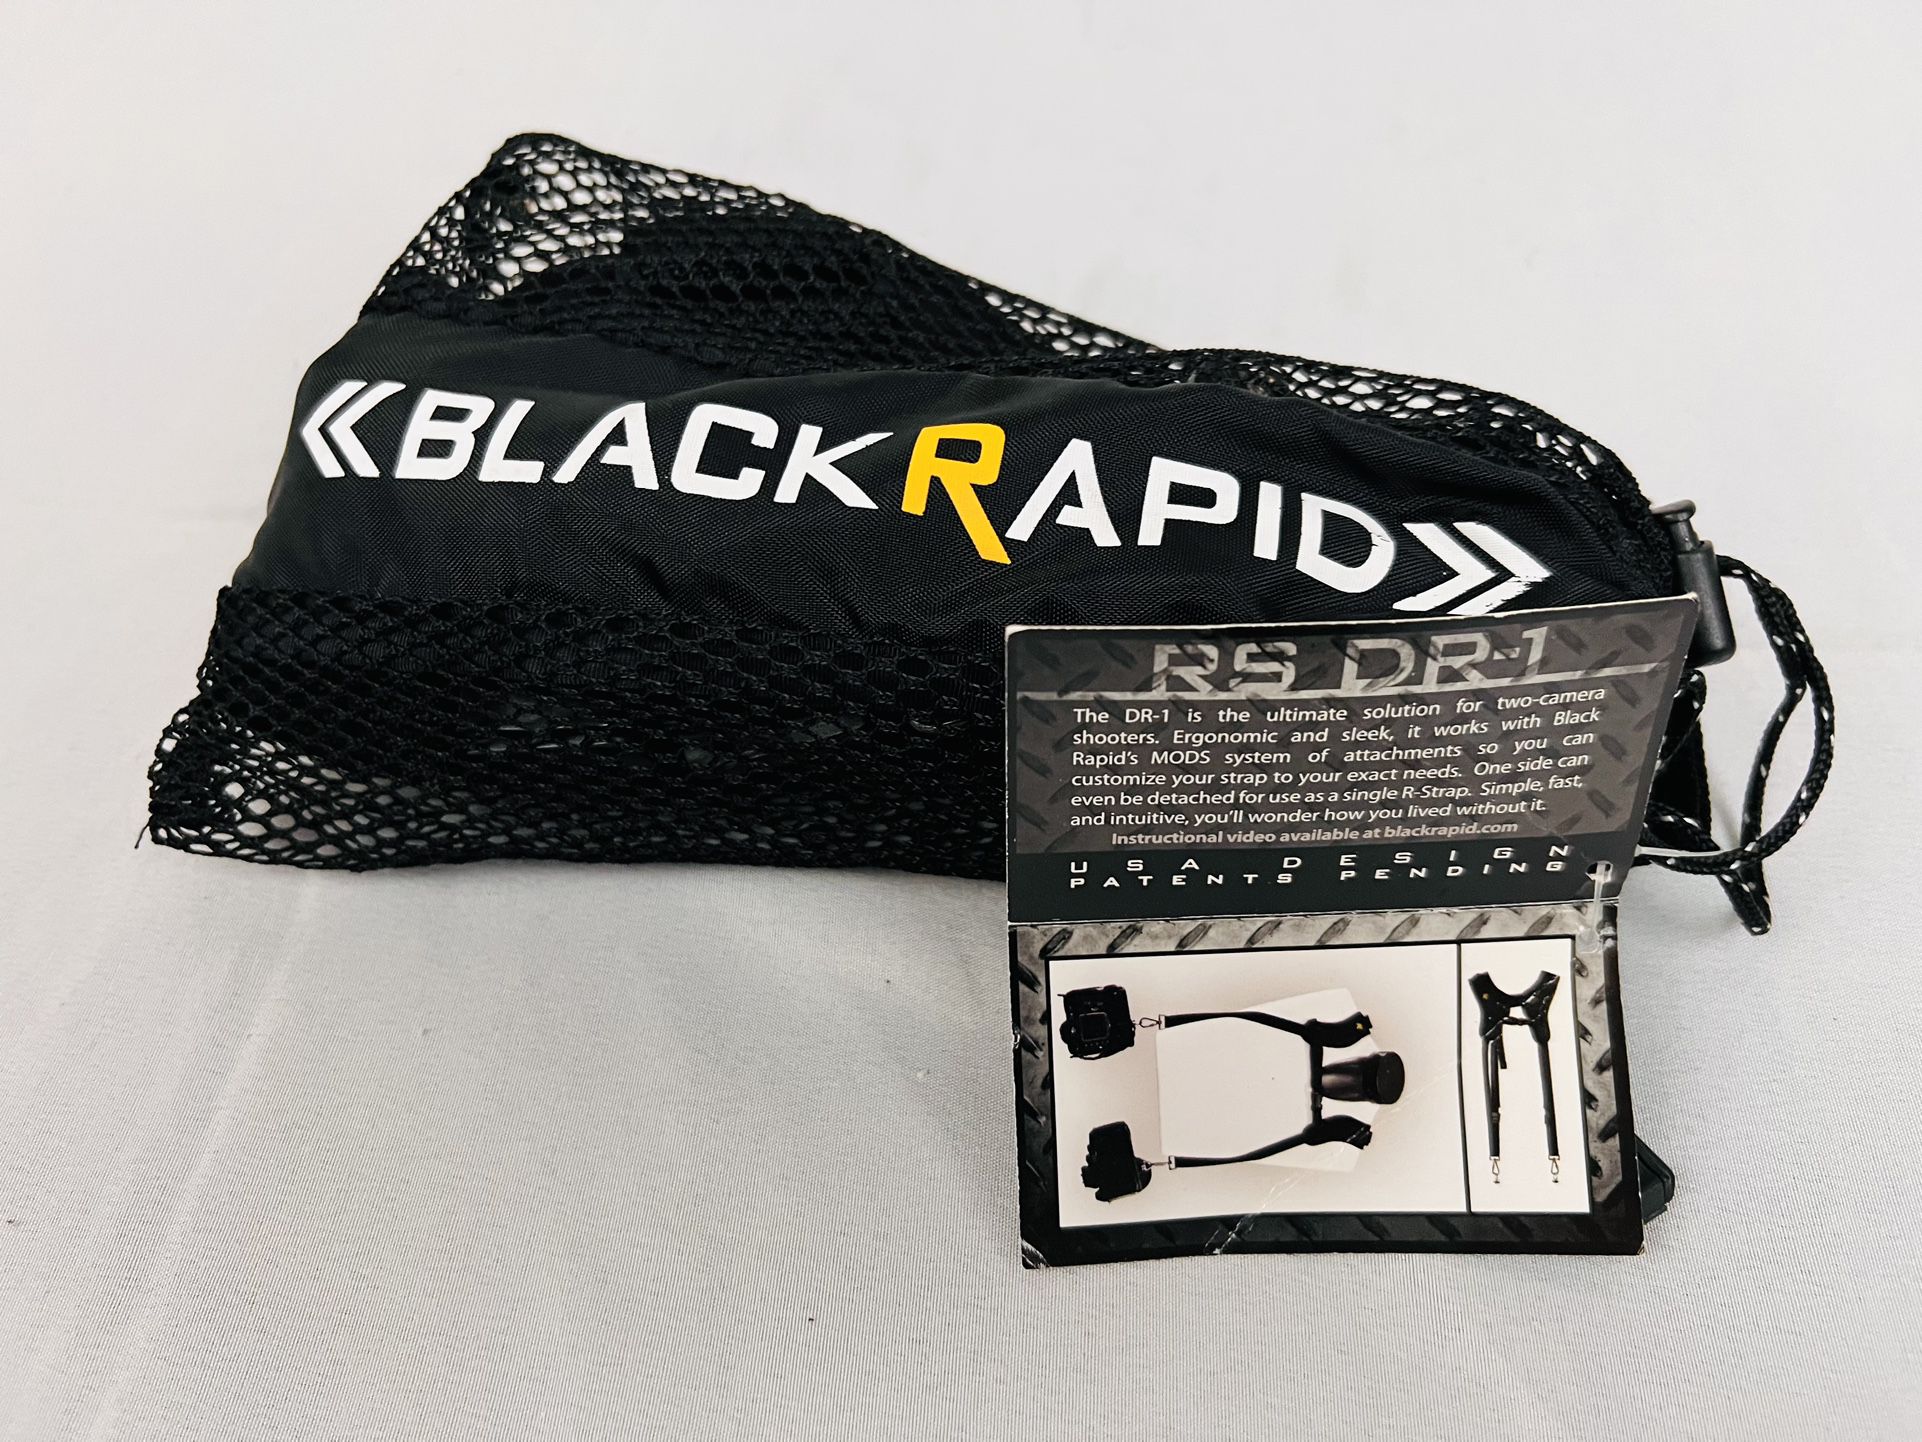 BlackRapid RS DR-1 Double Camera Strap - BNWT